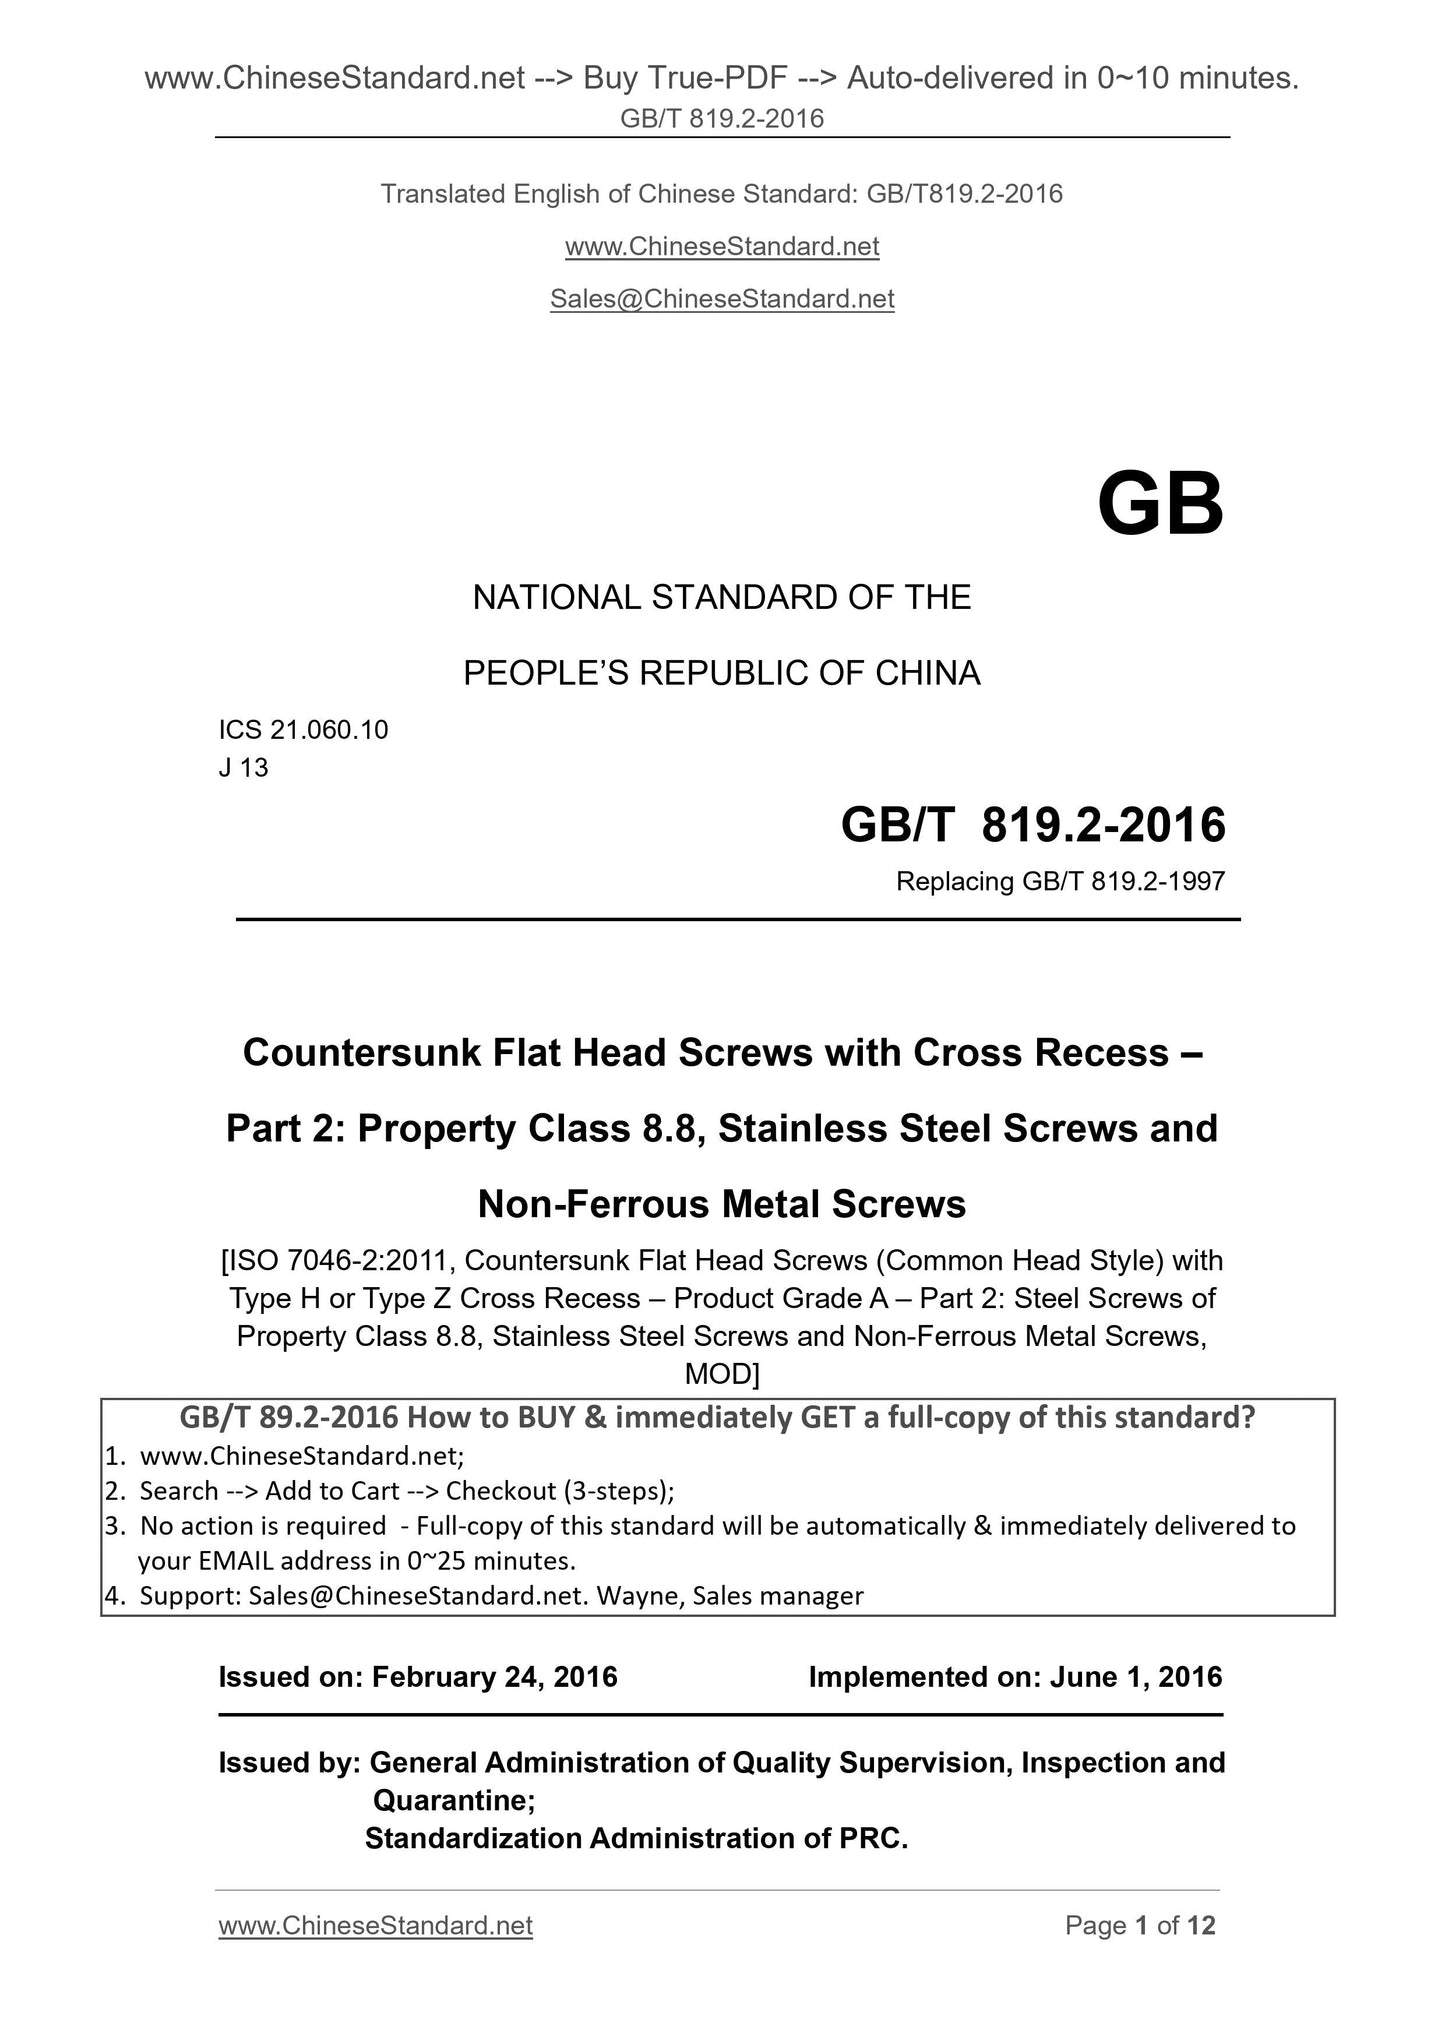 GB/T 819.2-2016 Page 1